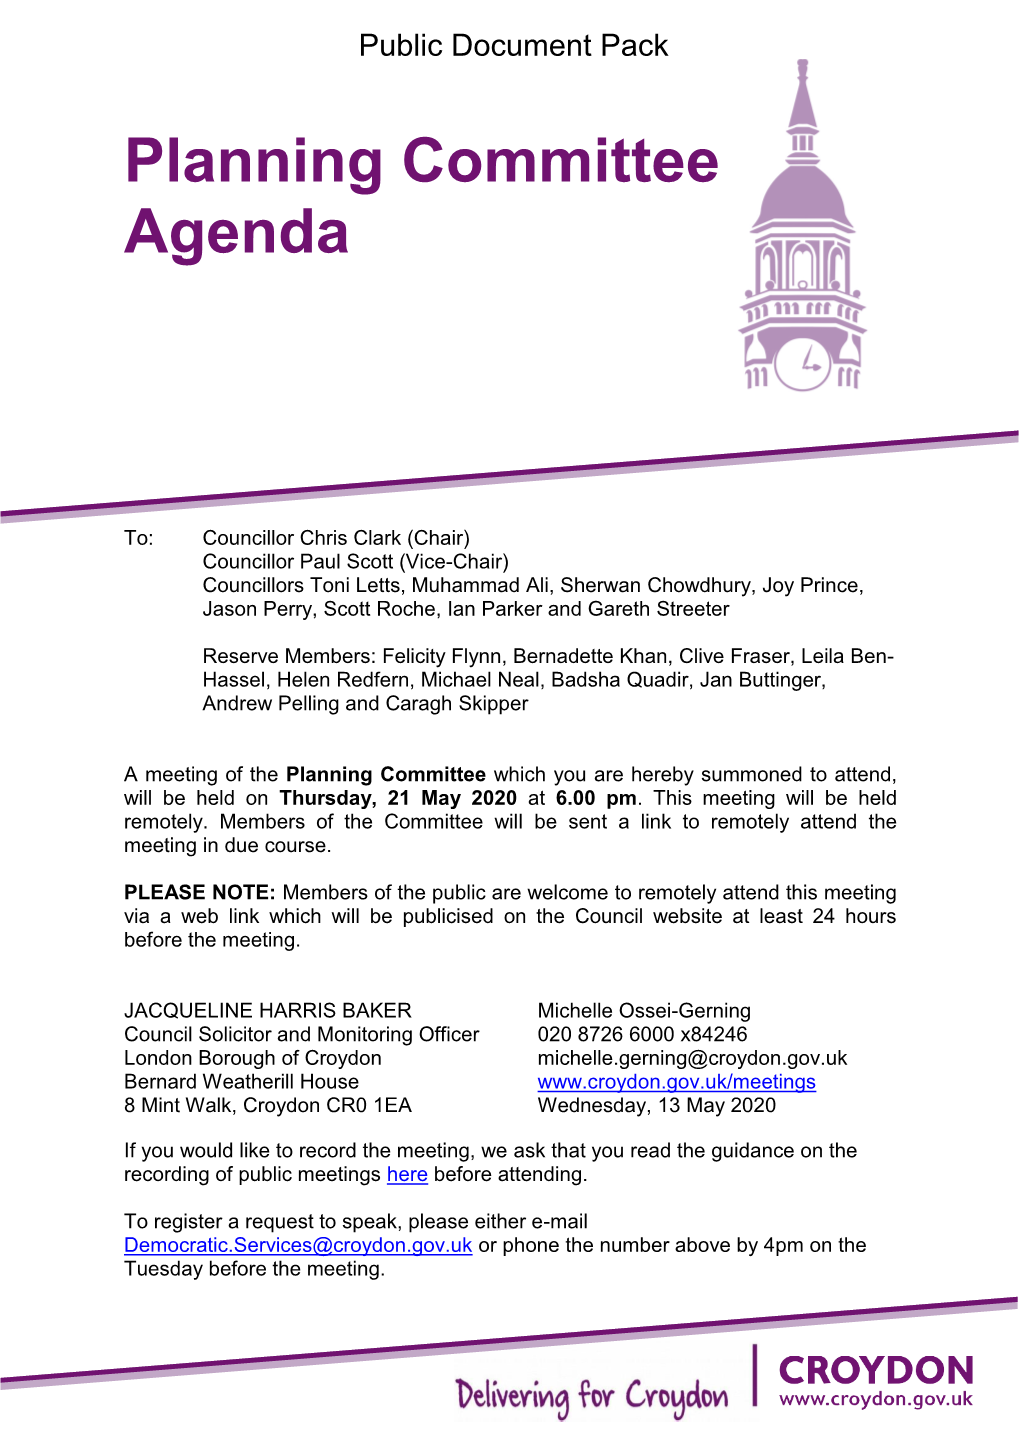 (Public Pack)Agenda Document for Planning Committee, 21/05/2020